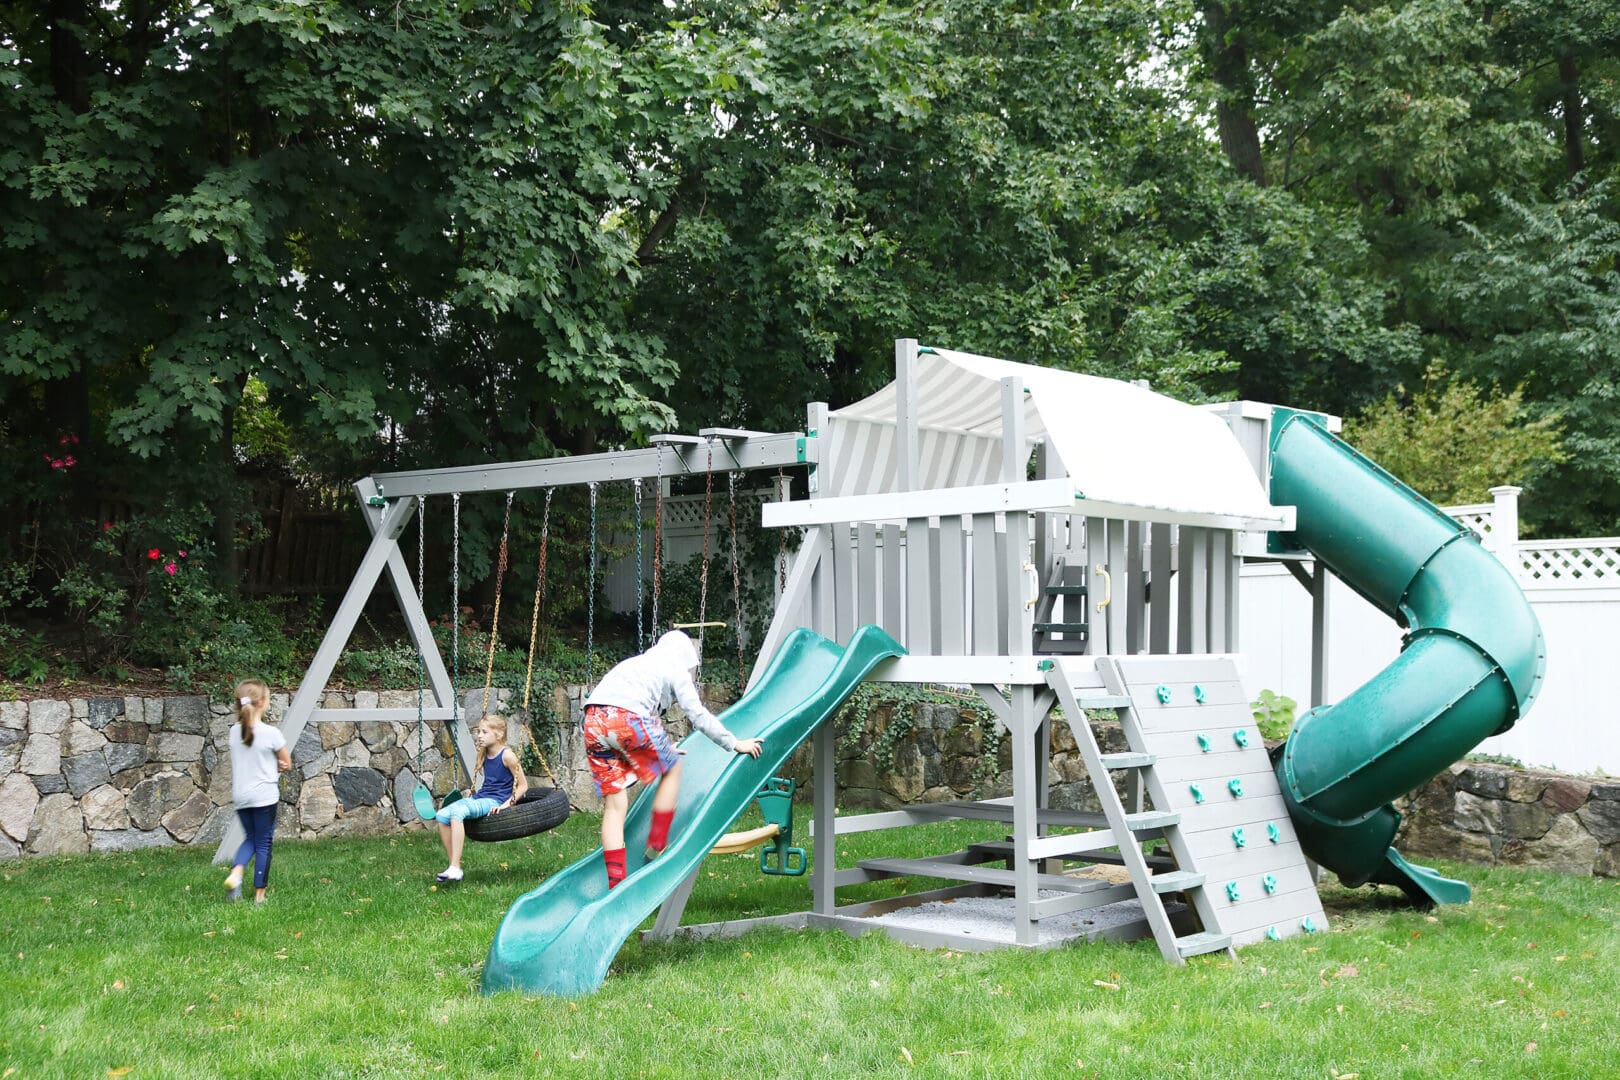 Taking our playground from drab to fab!  Check the before and afters of our backyard playset makeover while on a tight budget || Darling Darleen Top Lifestyle CT Blogger #darlingdblog